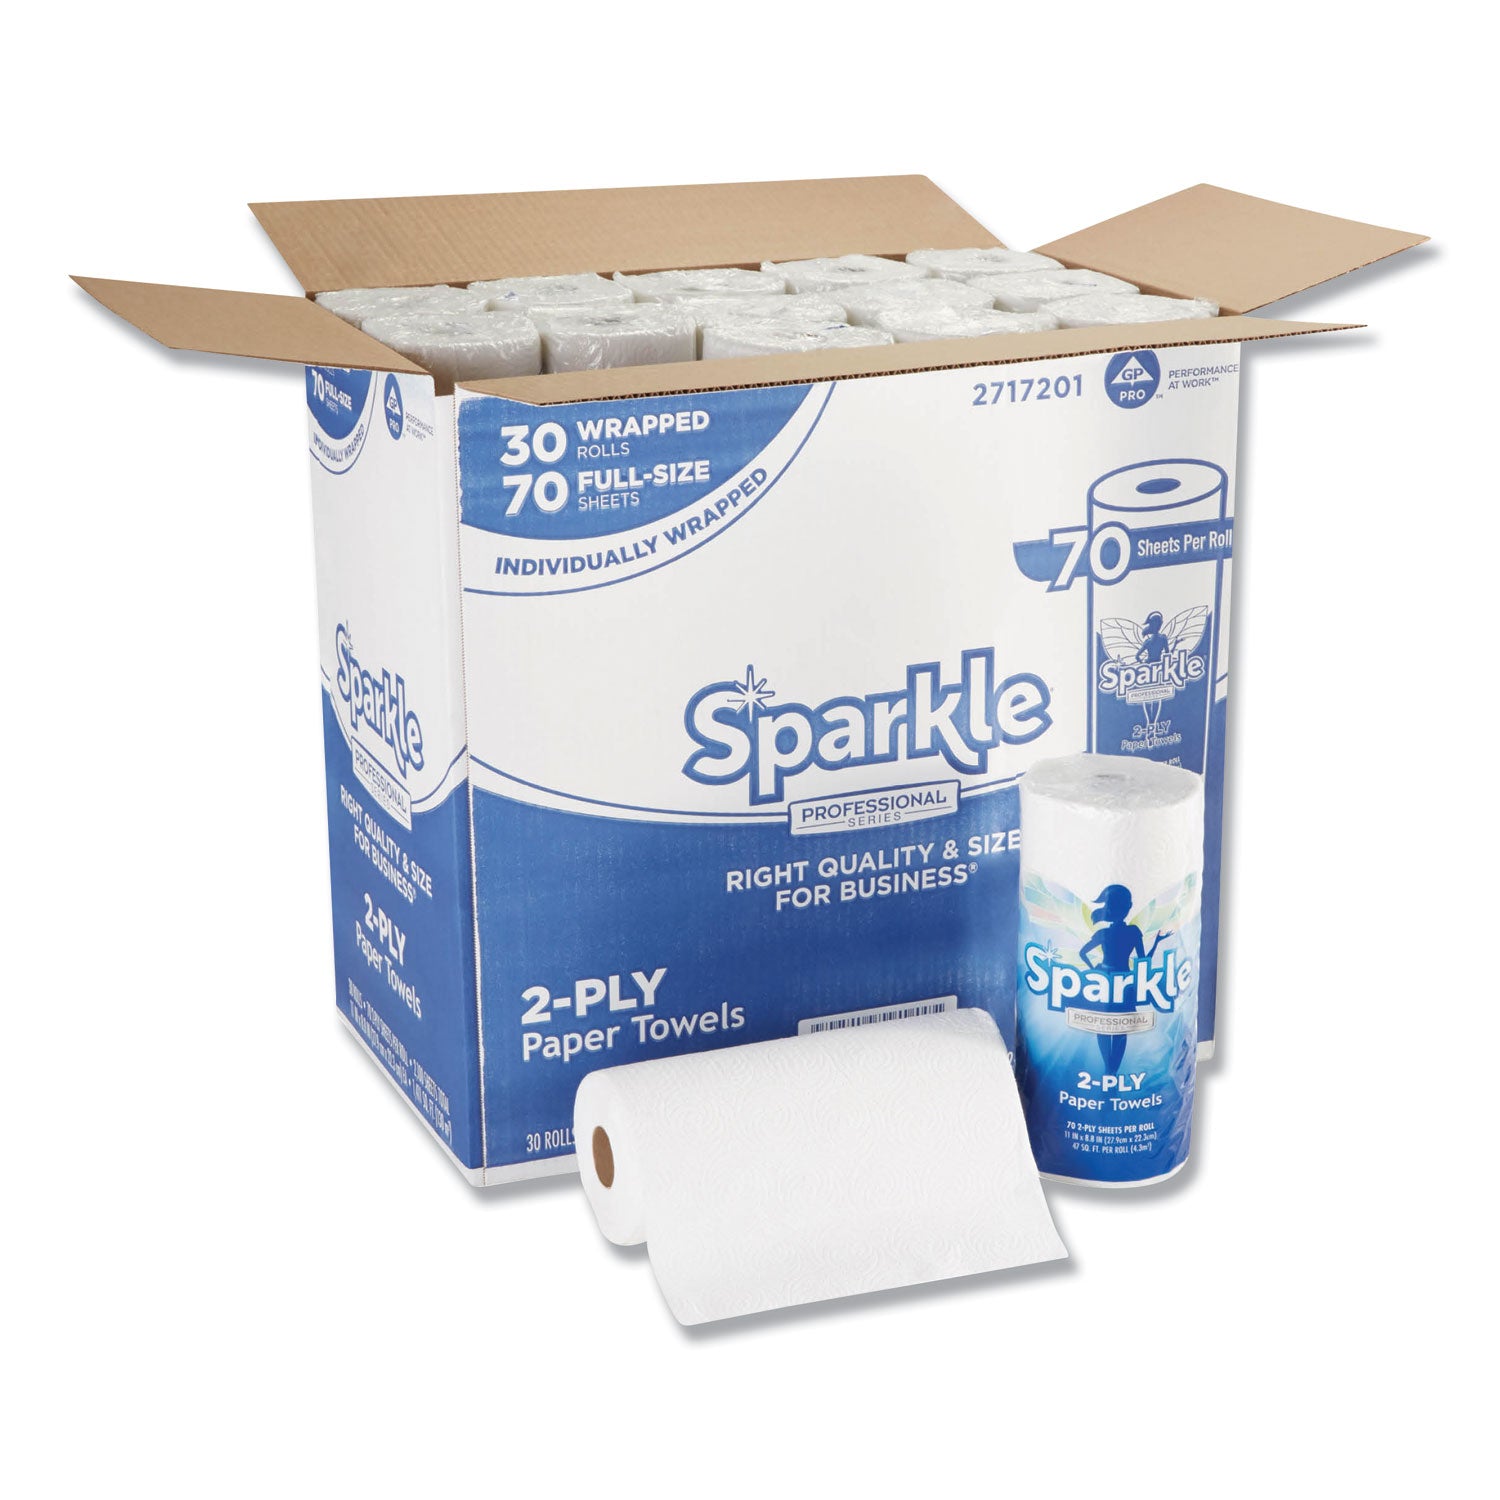 Sparkle ps Premium Perforated Paper Kitchen Towel Roll, 2-Ply, 11 x 8.8, White, 70 Sheets, 30 Rolls/Carton - 